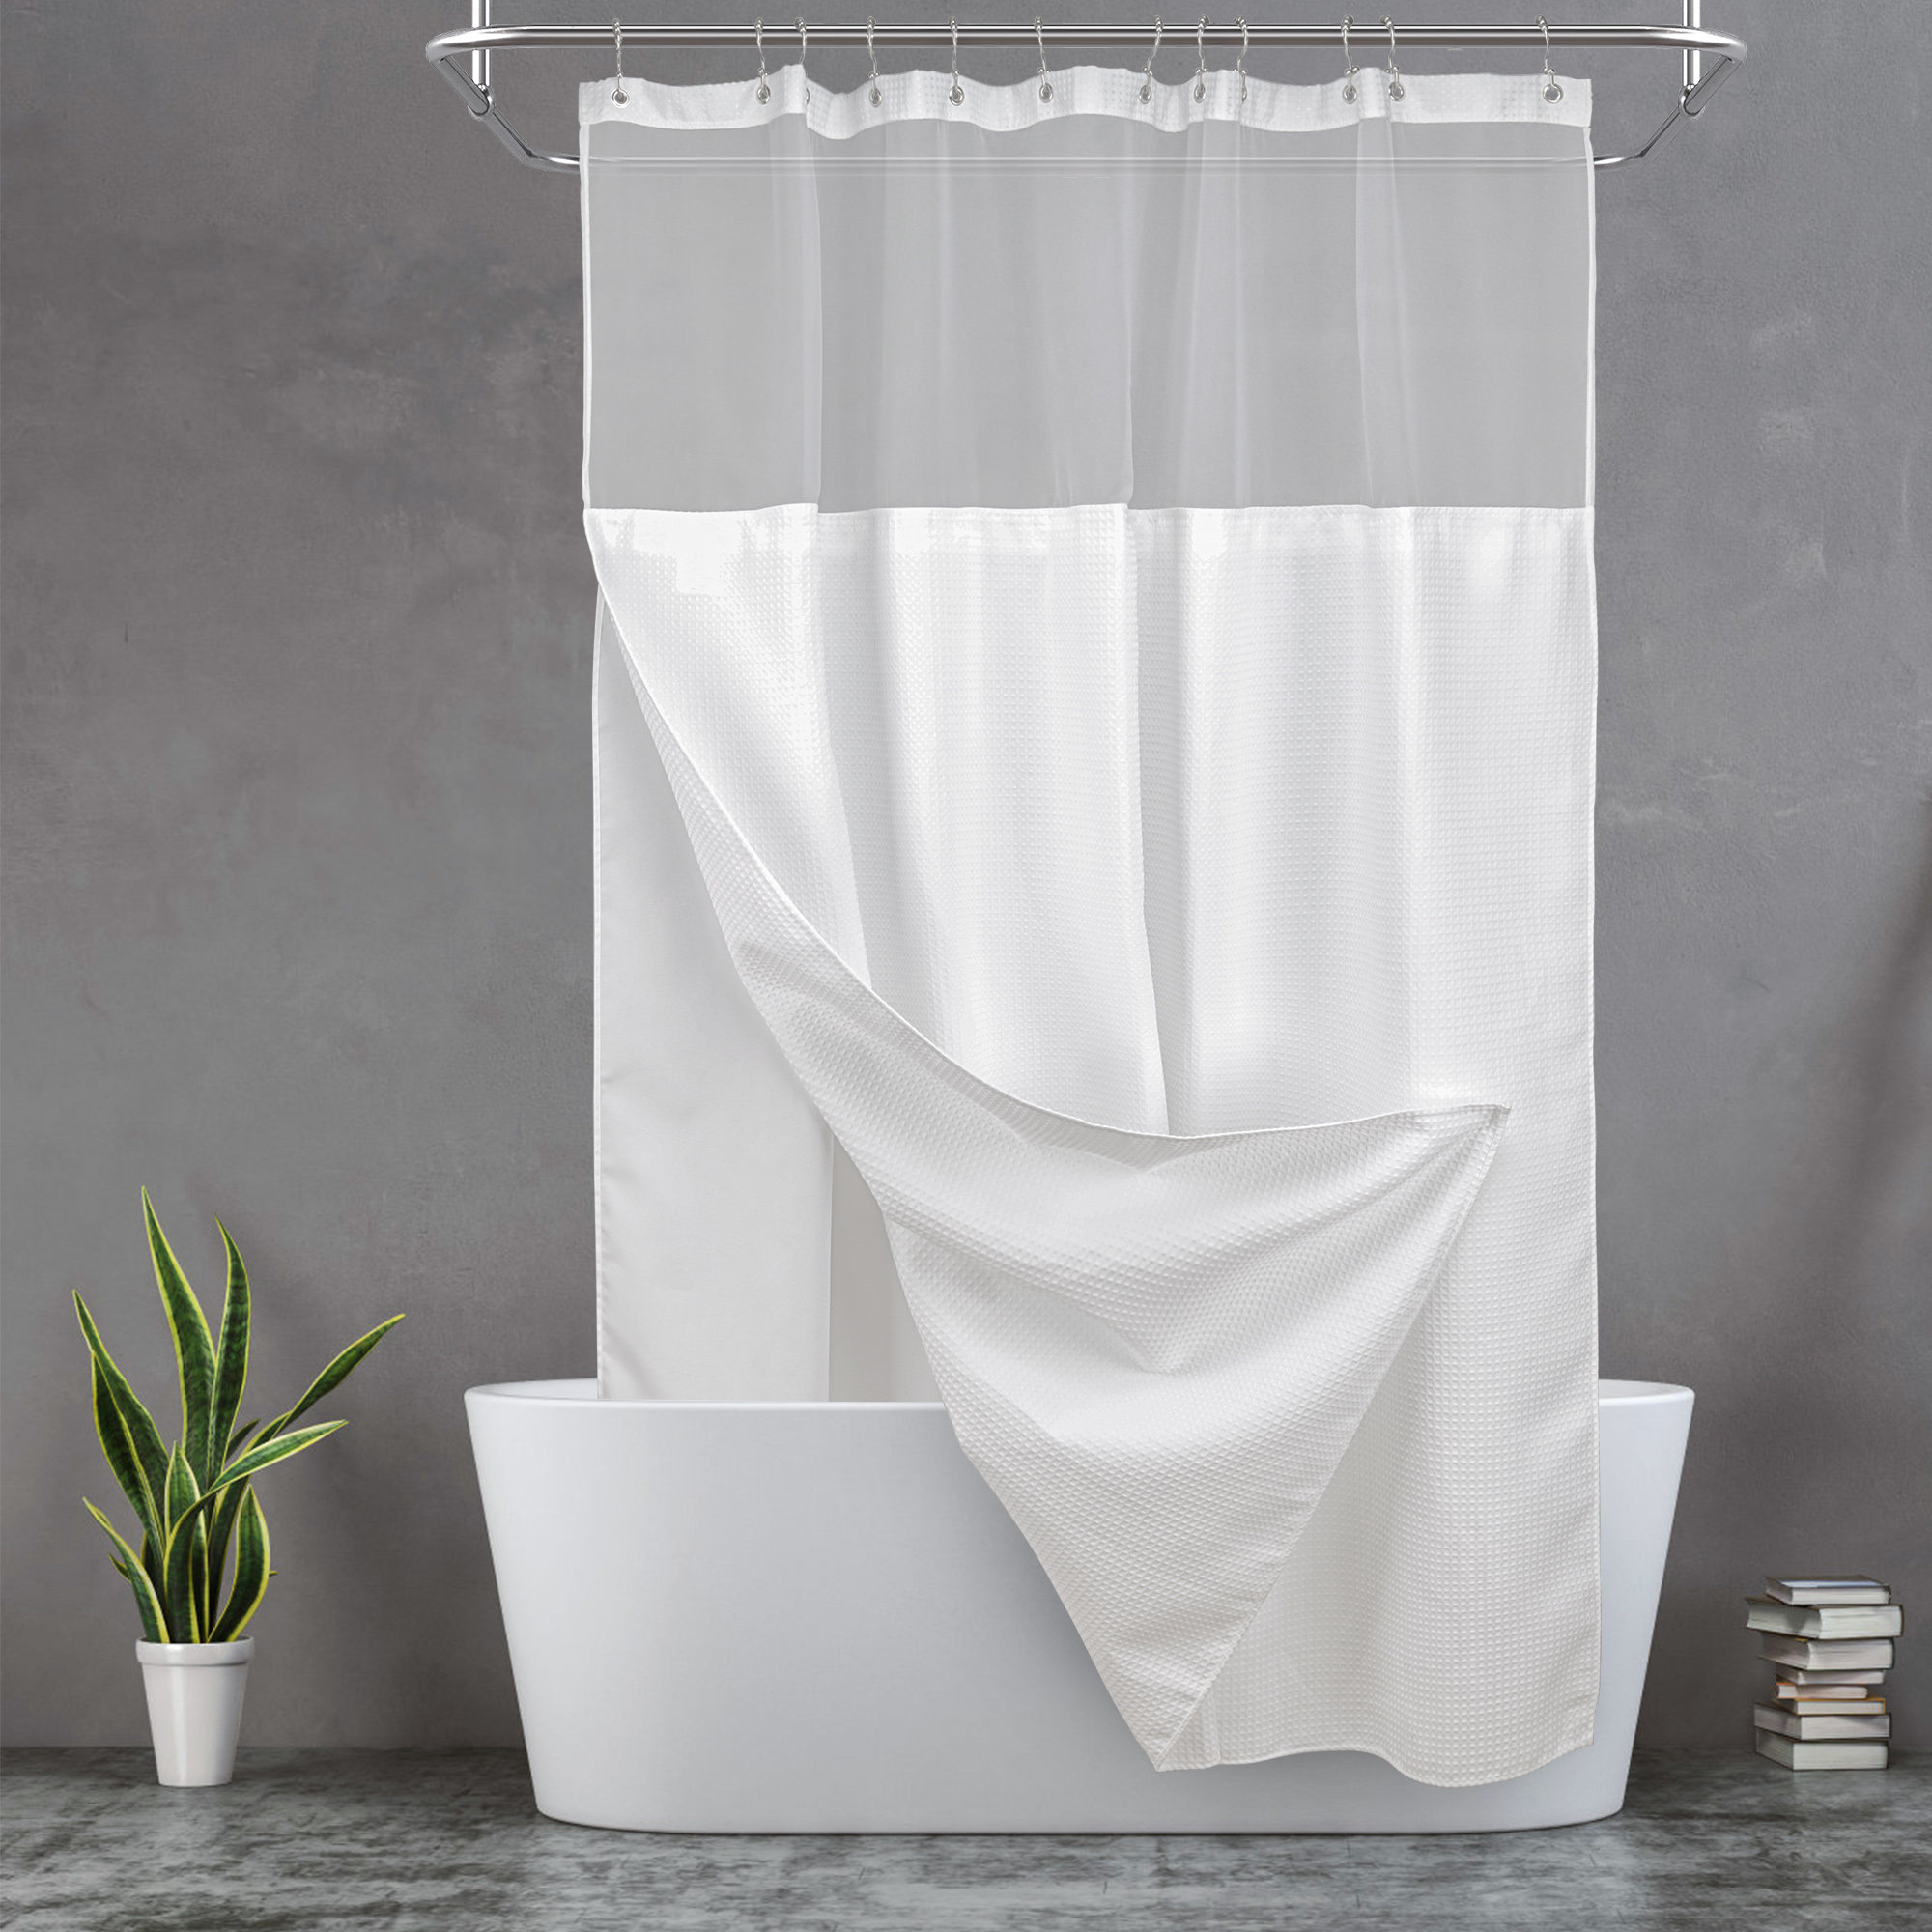 Details about   Tian Home Fabric Shower Curtain with 12 Hooks Bathroom Waterproof Shower Curtai 